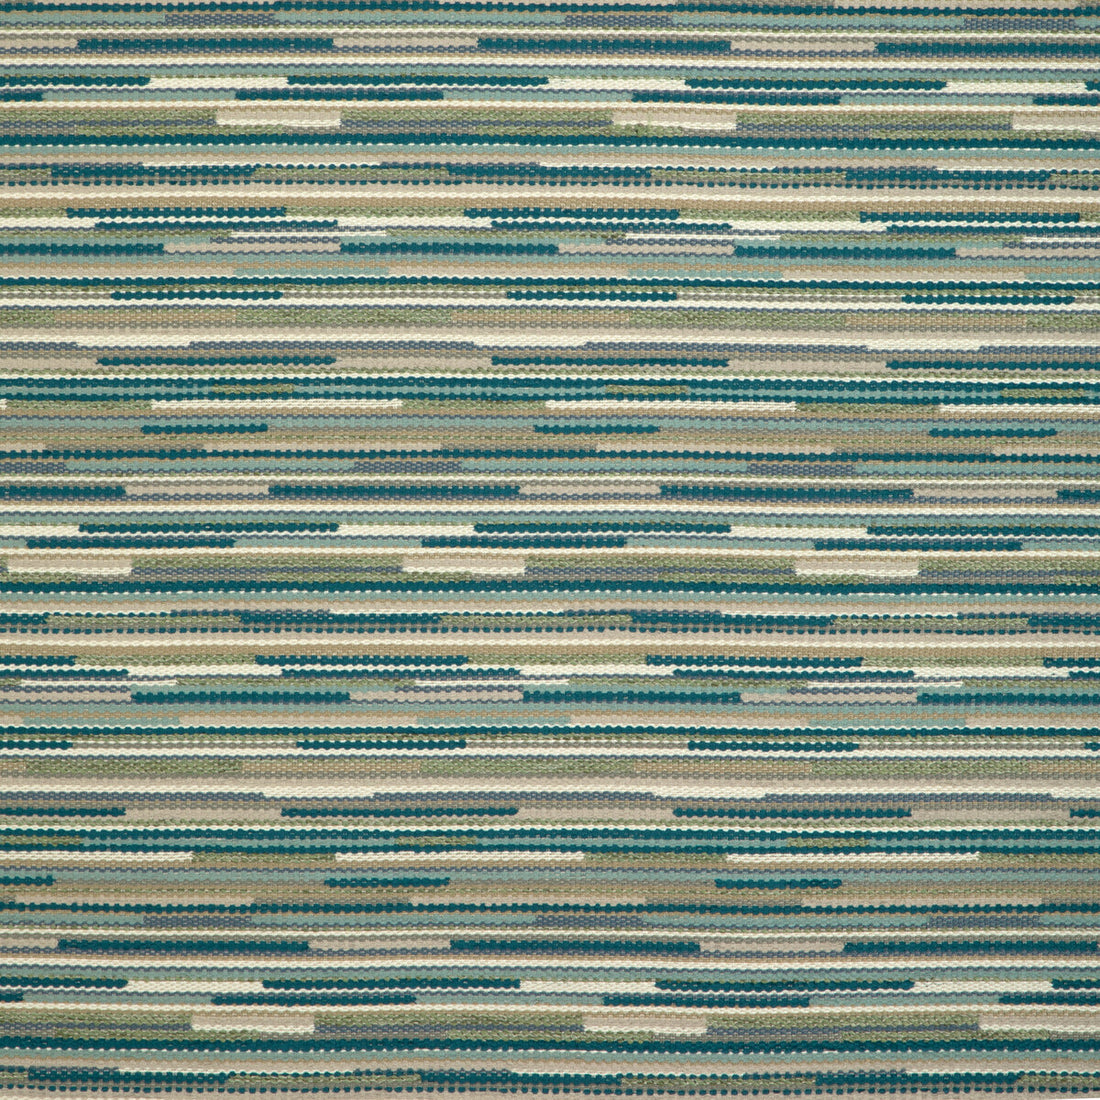 Watershed fabric in hillside color - pattern 37070.1315.0 - by Kravet Contract in the Chesapeake collection